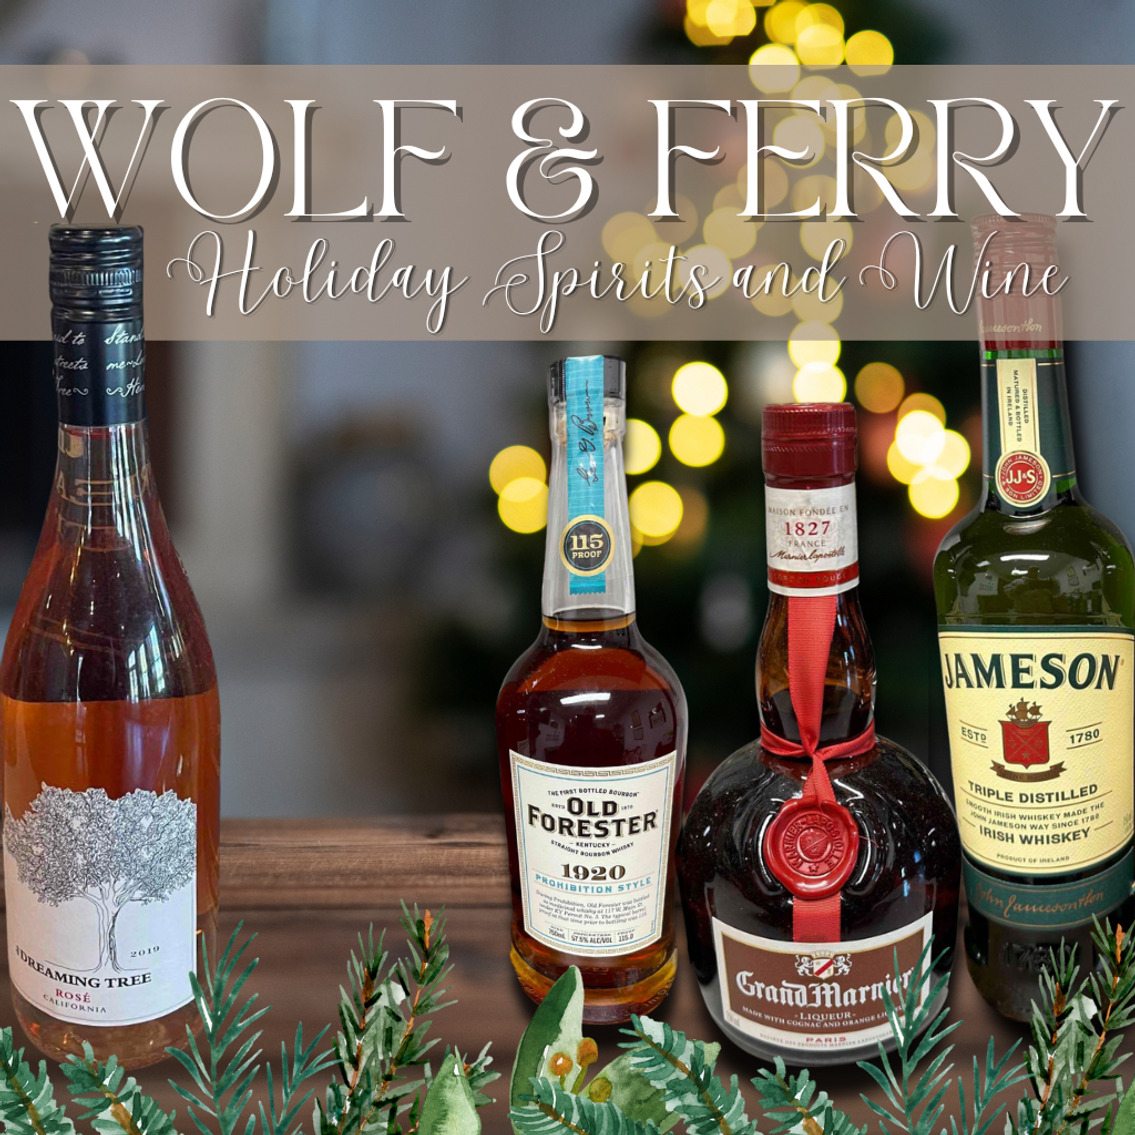 Wolf & Ferry Holiday Spirits and Wine